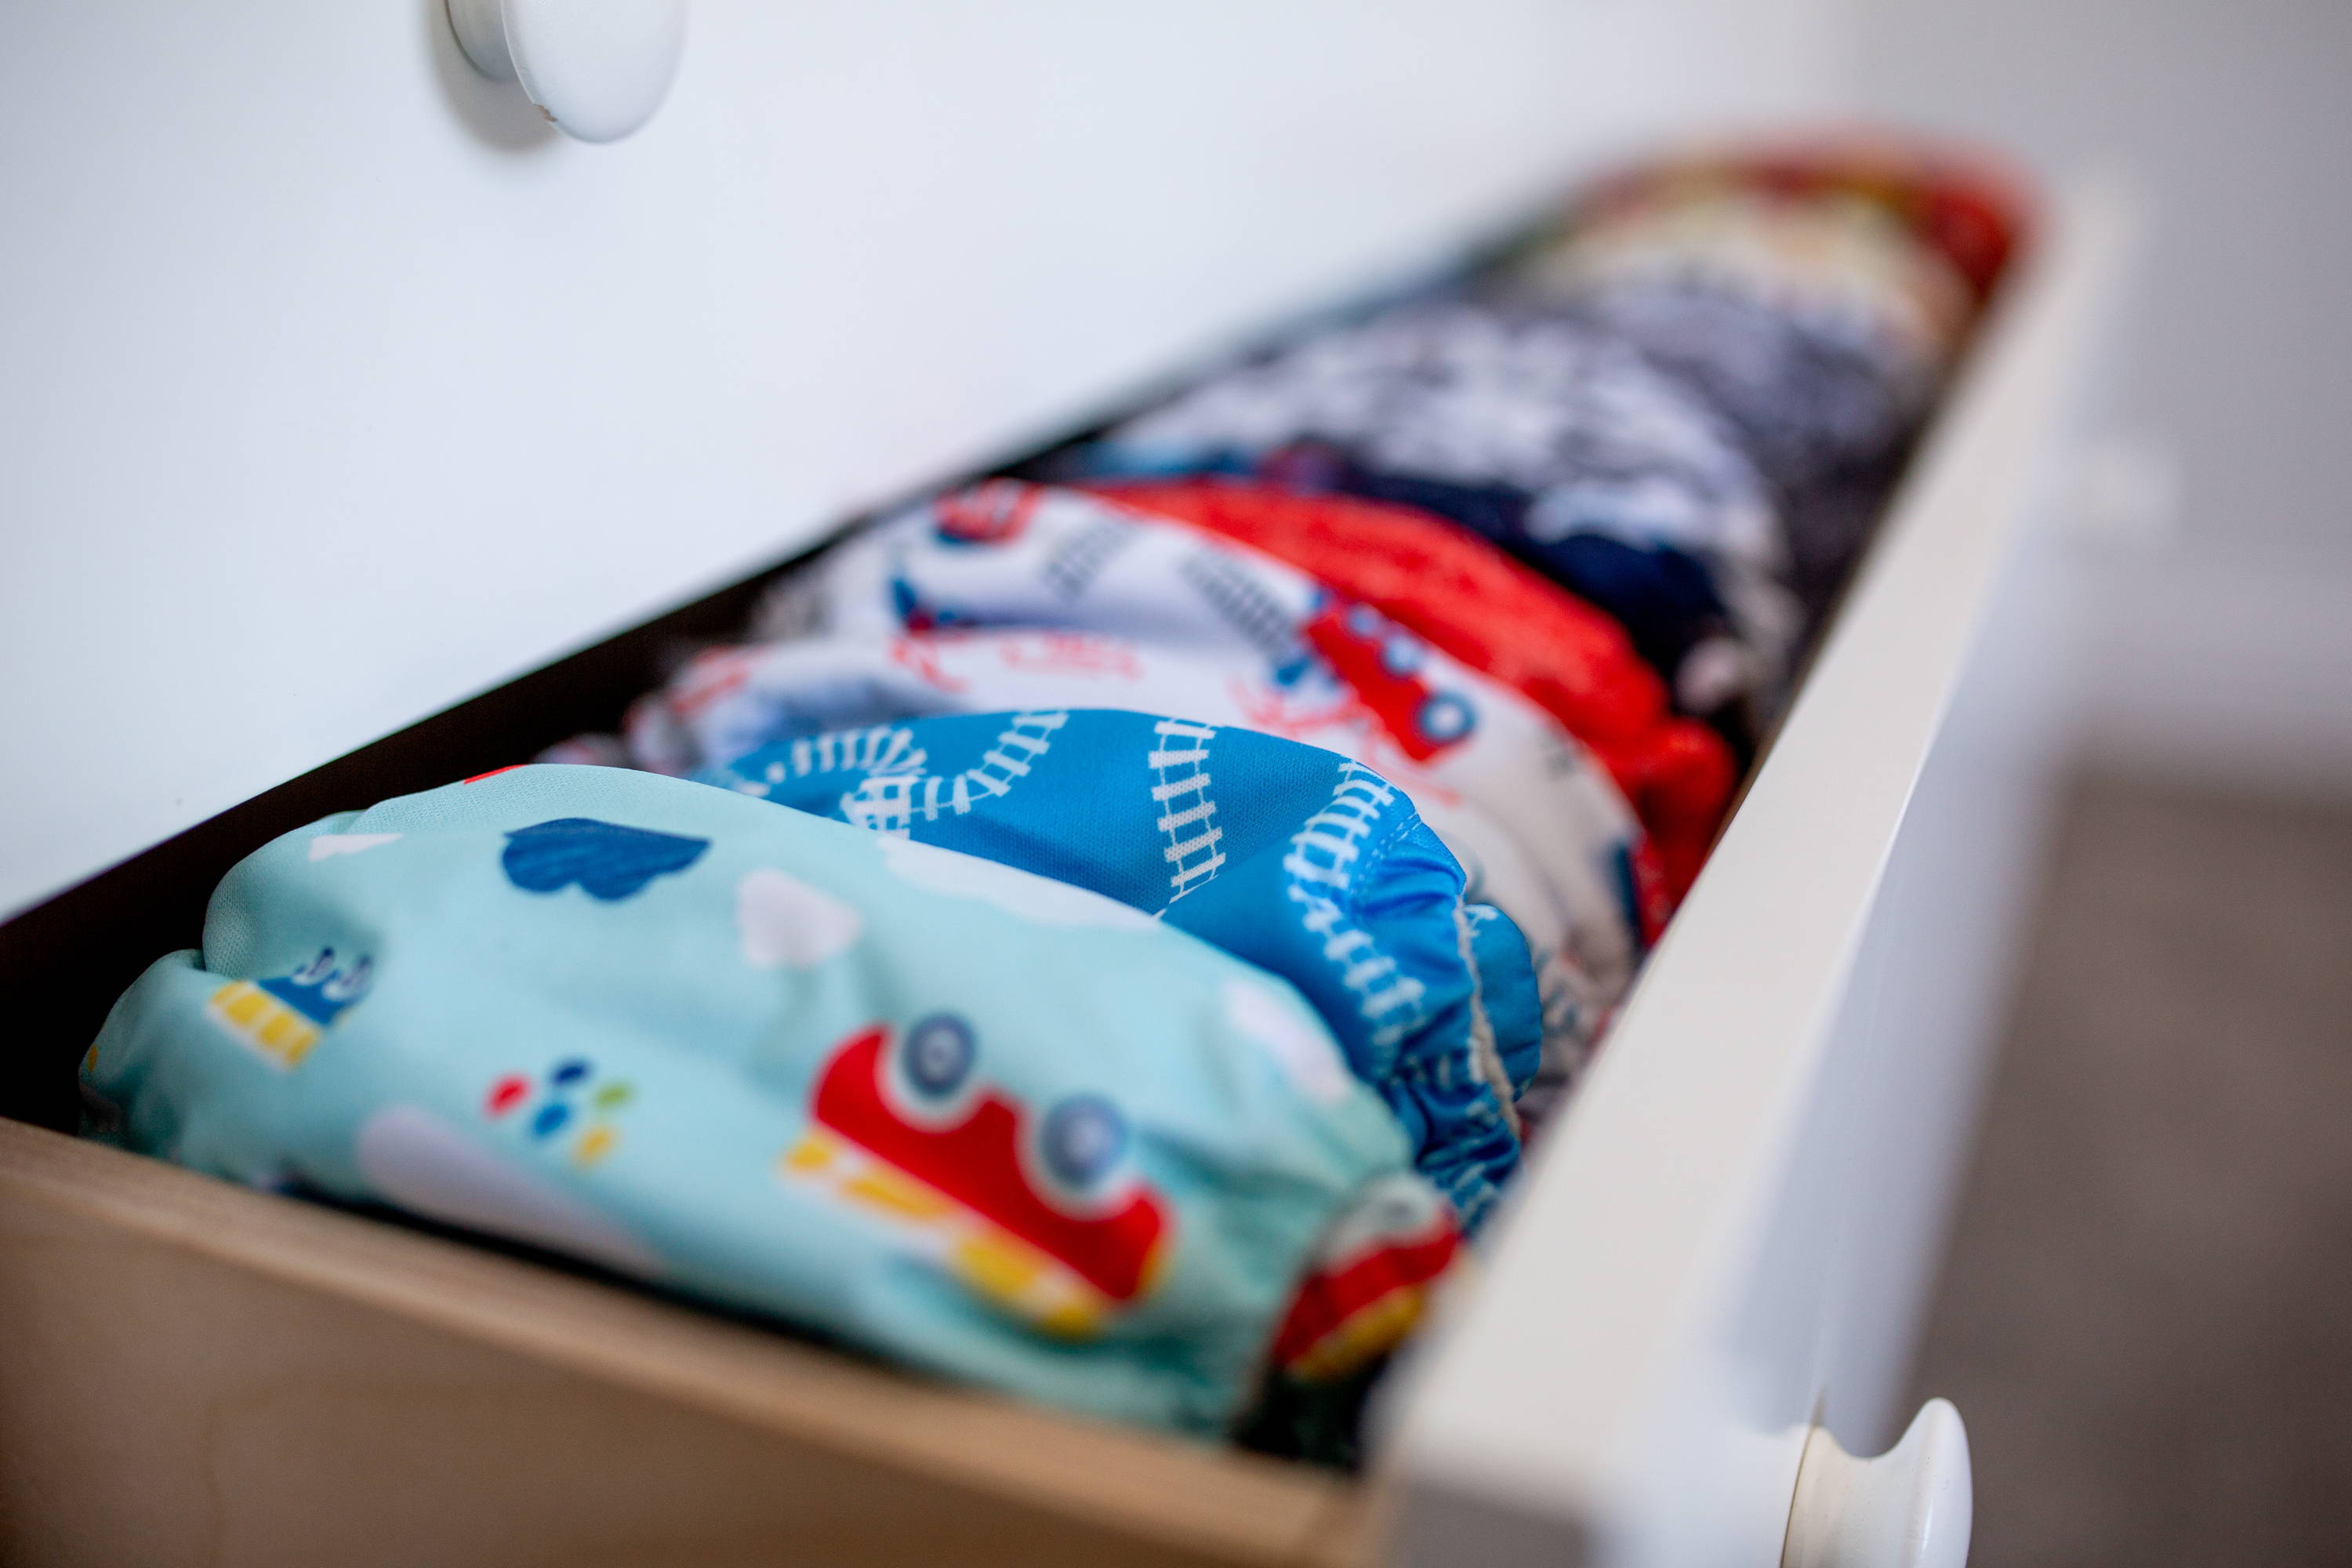 Drawer full of planes/trains themed cloth diapers looking colorful behind our black and white text saying 